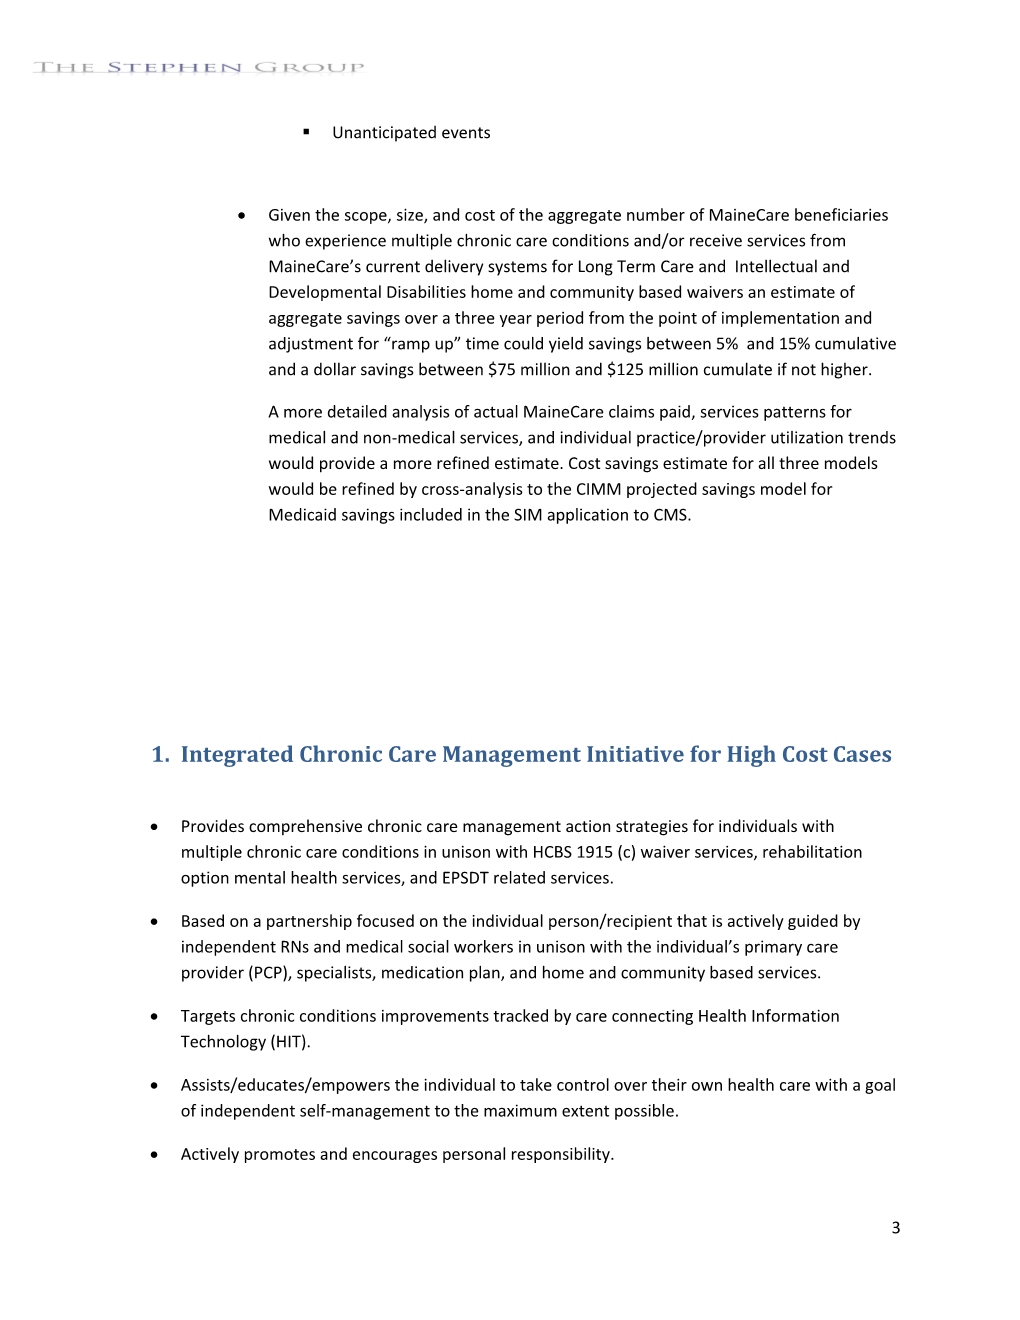 Interim Term Quality Improvement and Cost Savings Strategy Recommendations to the Mainecare